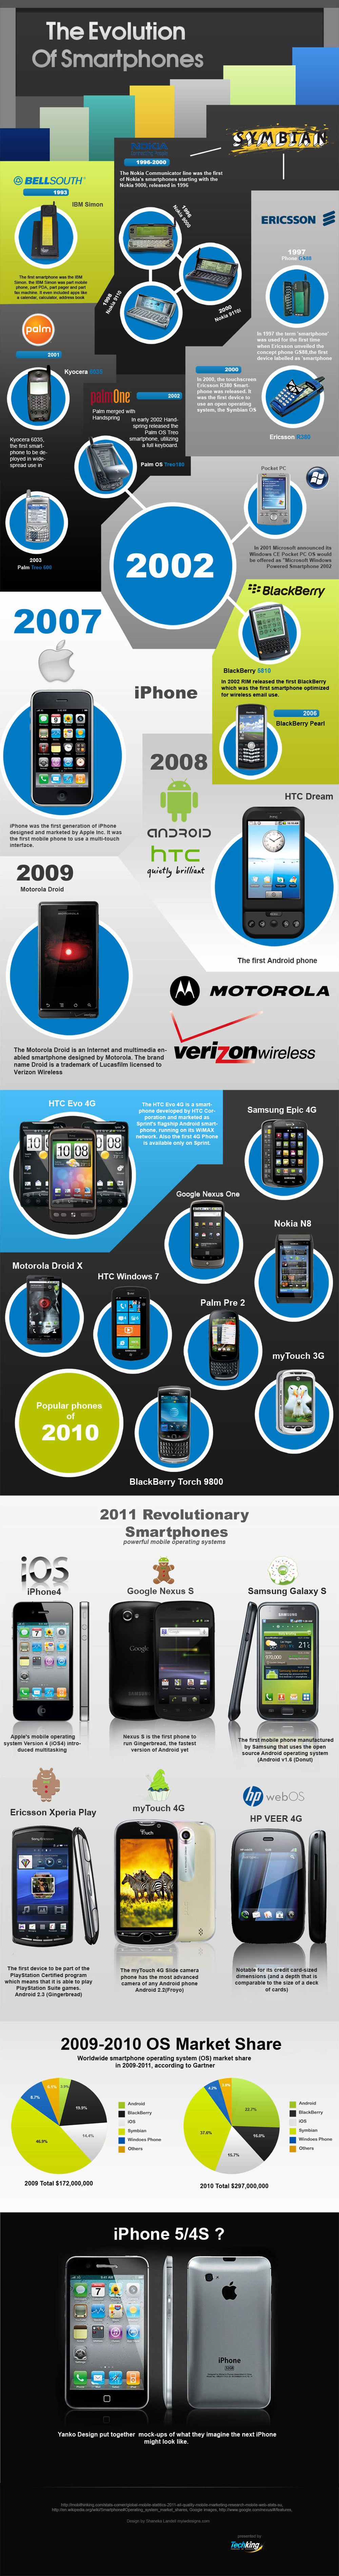 The-Smartphone-History-Timeline-Infographic-1.jpg